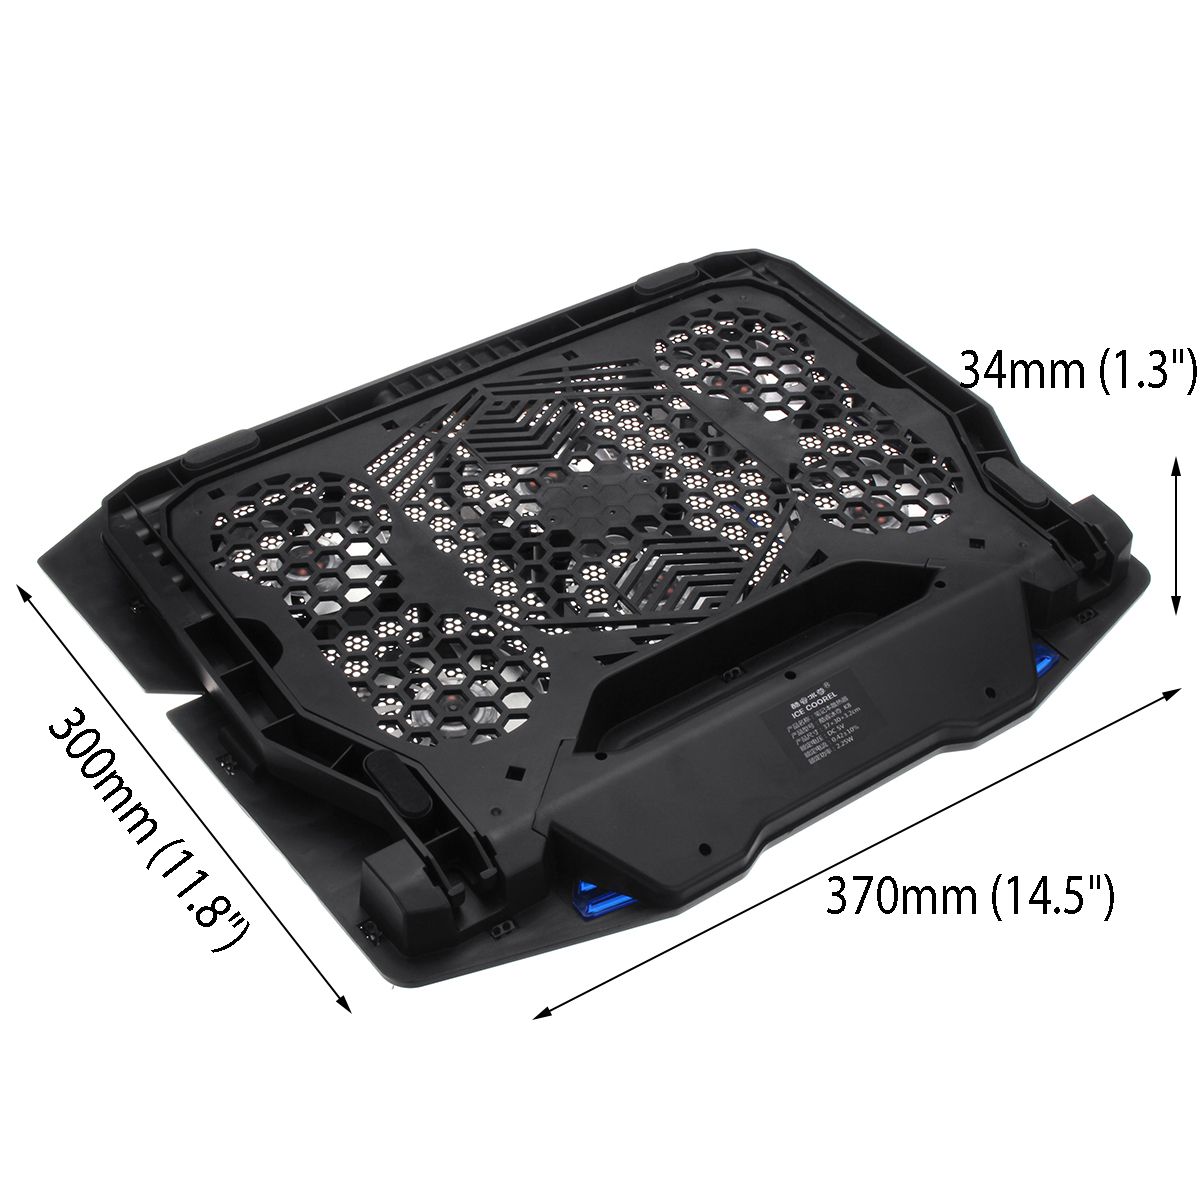 K8-Laptop-Stand-5-level-Height-Adjustment-6-Fans-with-2-USB-Ports-Cooling-For-12-156-inch-Notebook-1668443